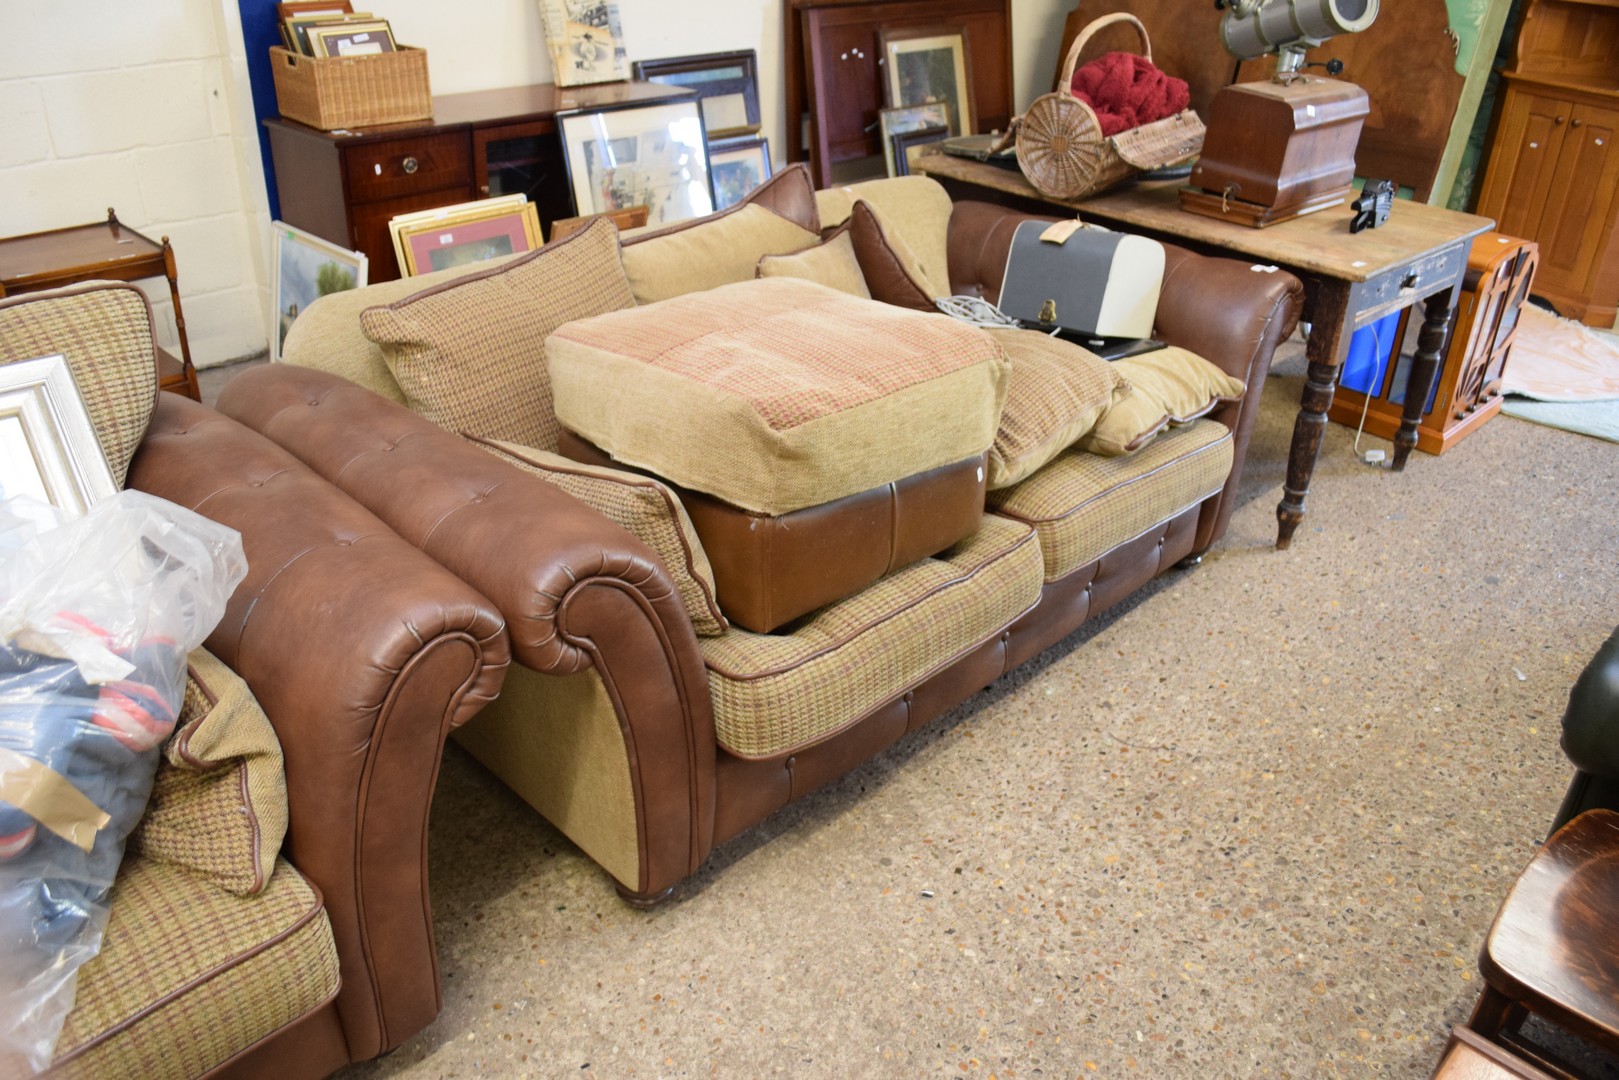 PAIR OF MODERN BROWN LEATHER AND FABRIC COVERED THREE SEATER SOFAS AND ACCOMPANYING FOOT STOOL - Image 3 of 3